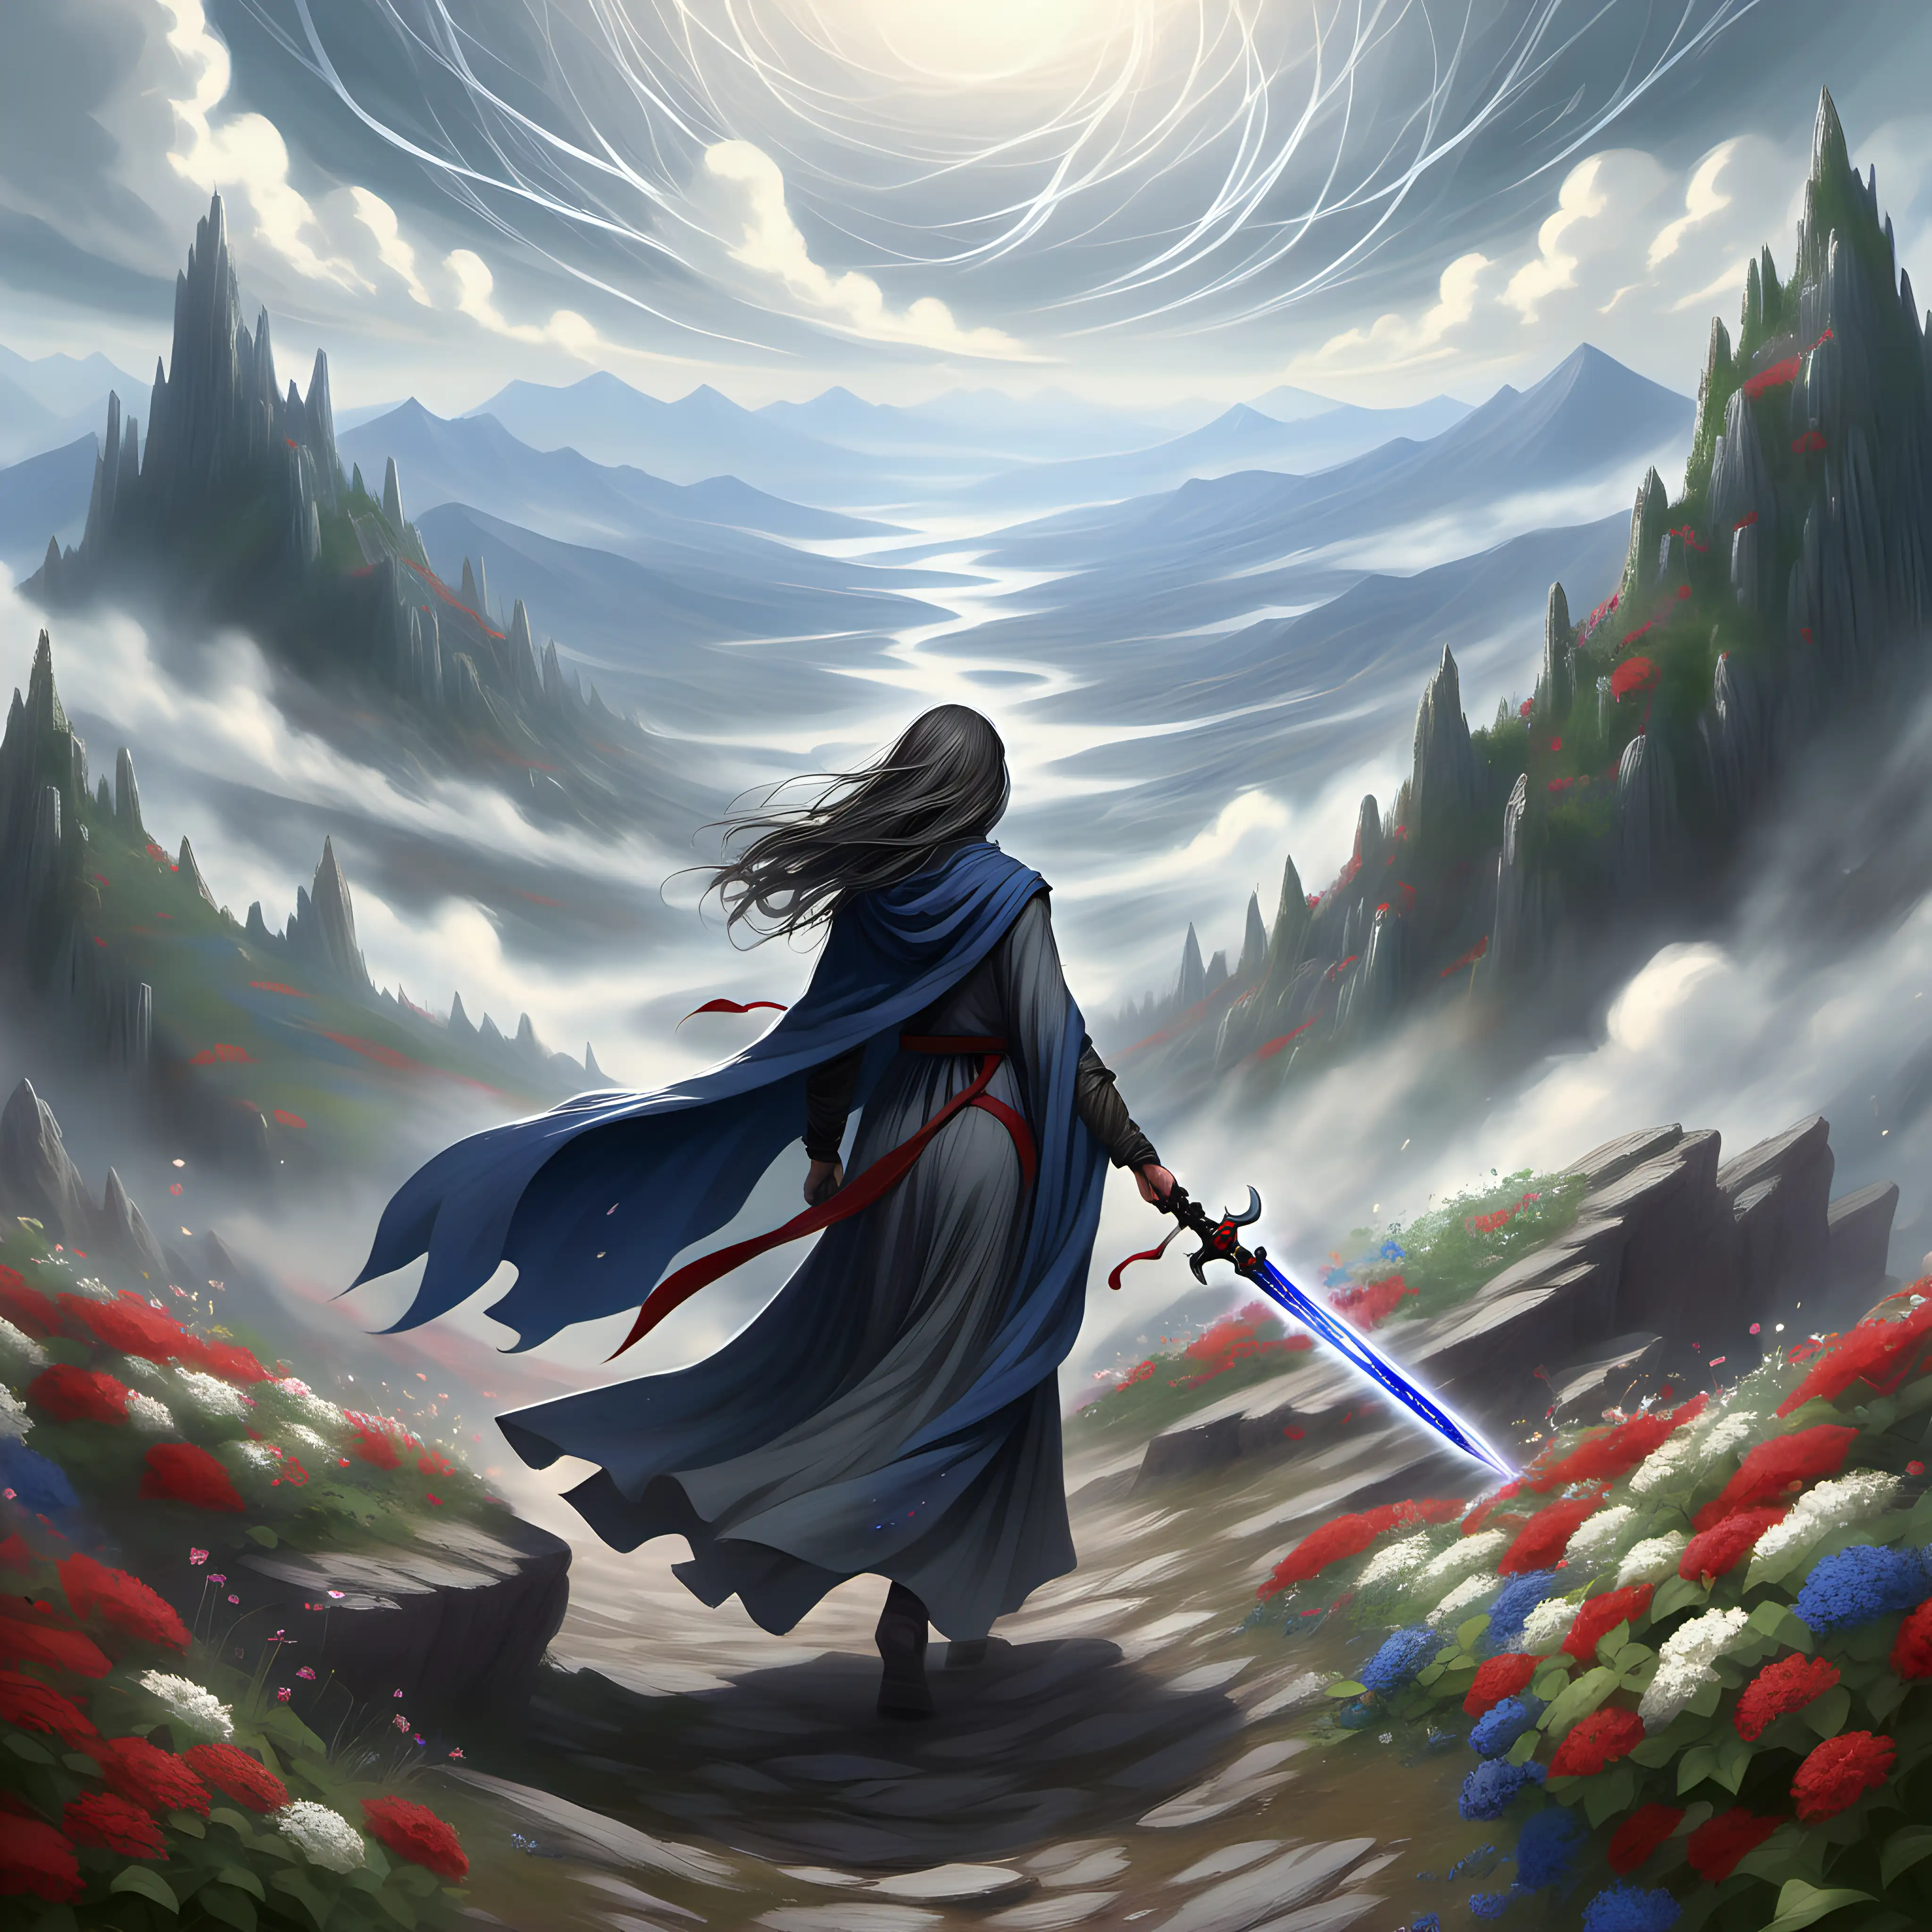 Mystical GrayCloaked Woman with Lapis Sword amidst Floral Whirlwind on Mountain Plateau